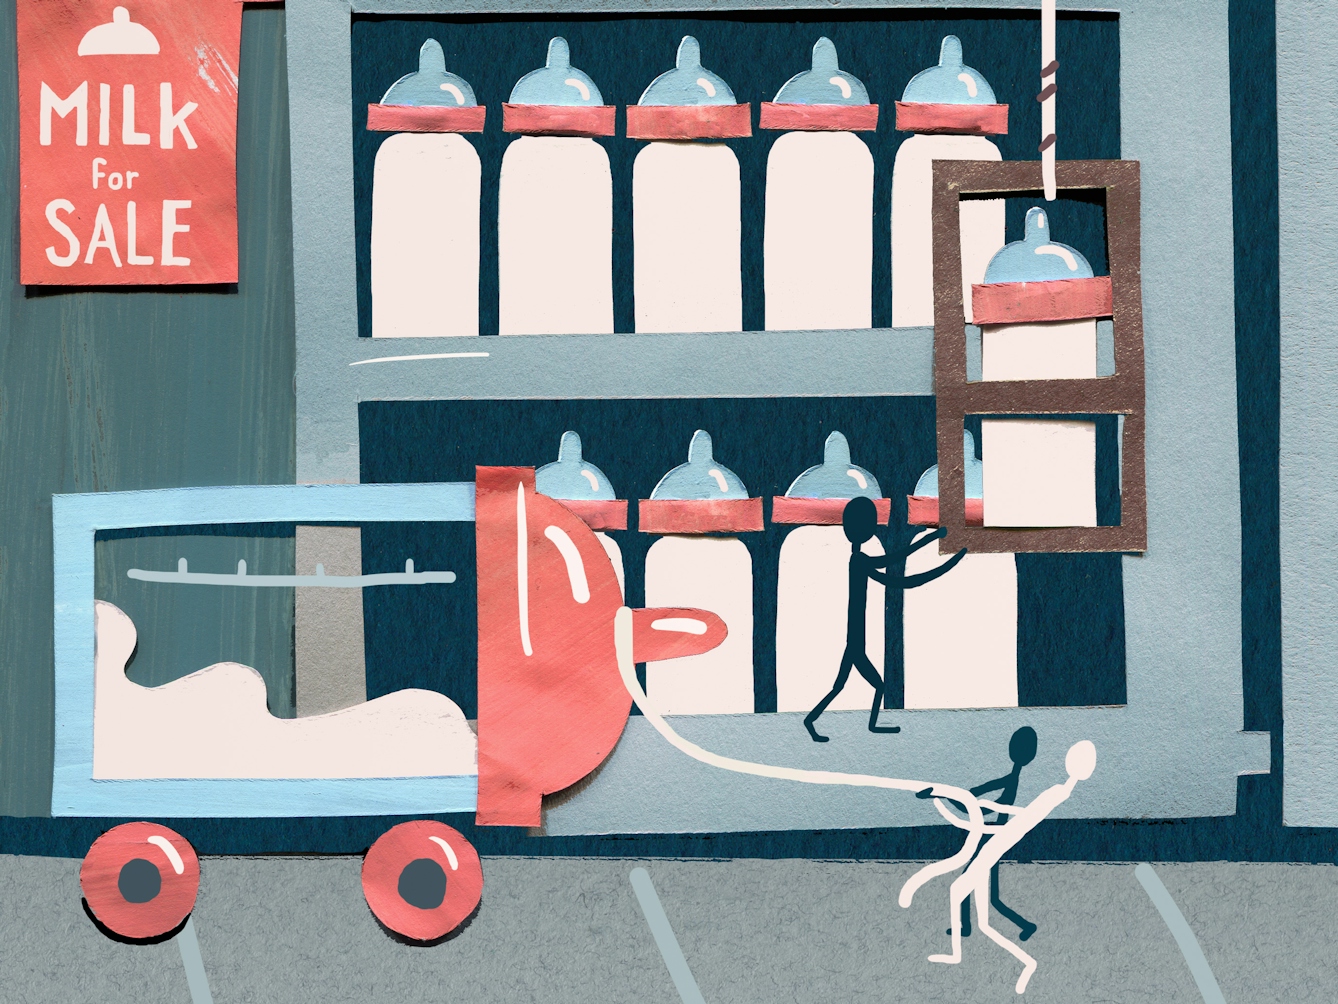 A mixed media illustration depicting fridges of baby bottles filled with milk. Tiny stick figure people are moving the bottles around. One bottle is being lowered as if by a crane and the other has wheels on it and is being dragged across the floor.